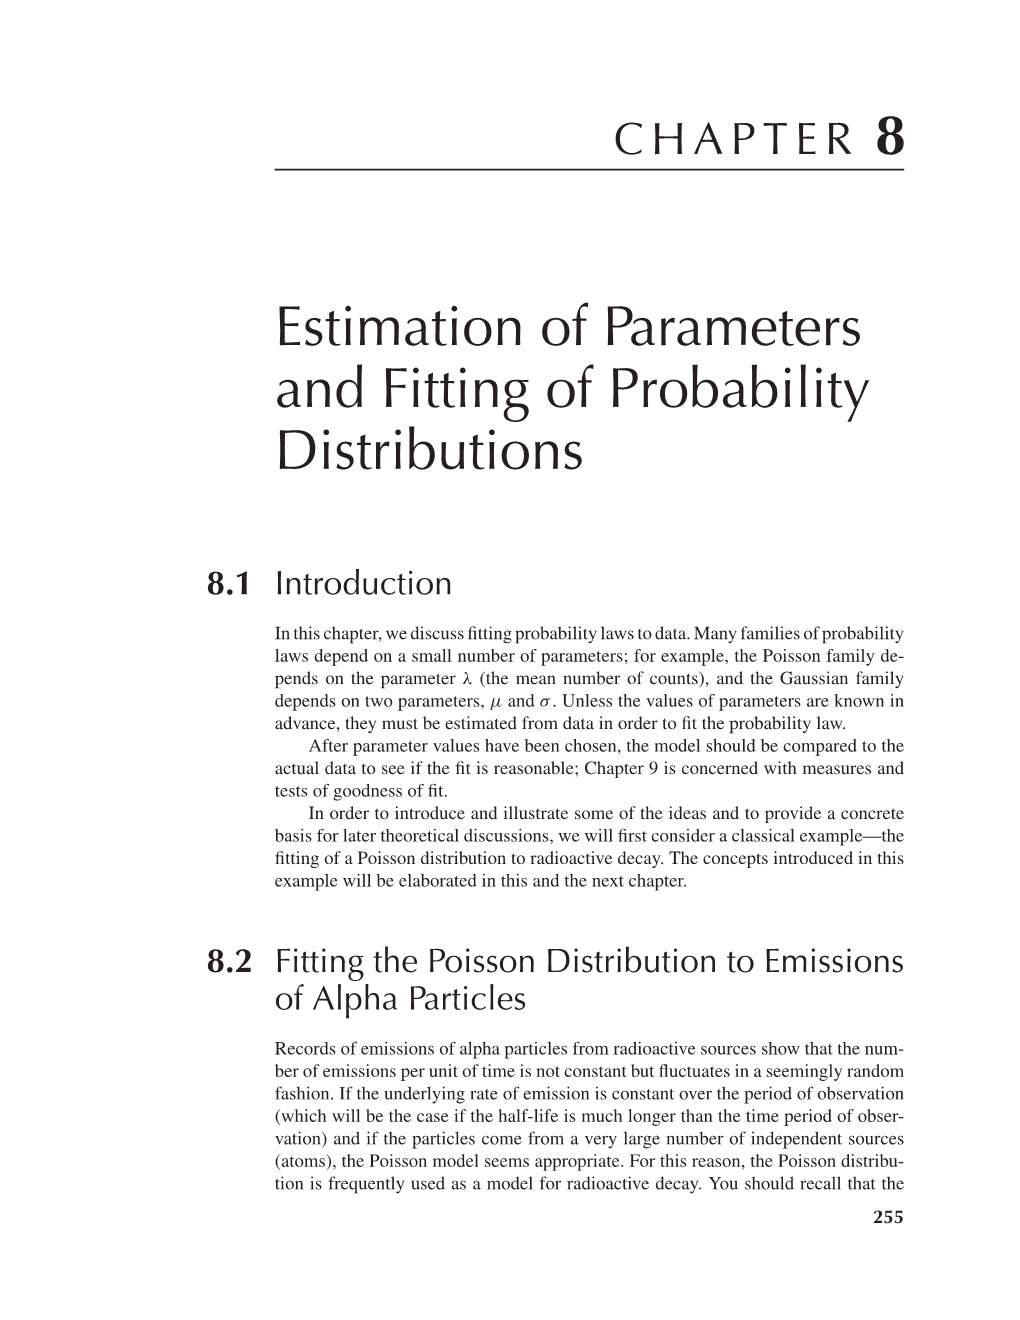 Estimation of Parameters and Fitting of Probability Distributions